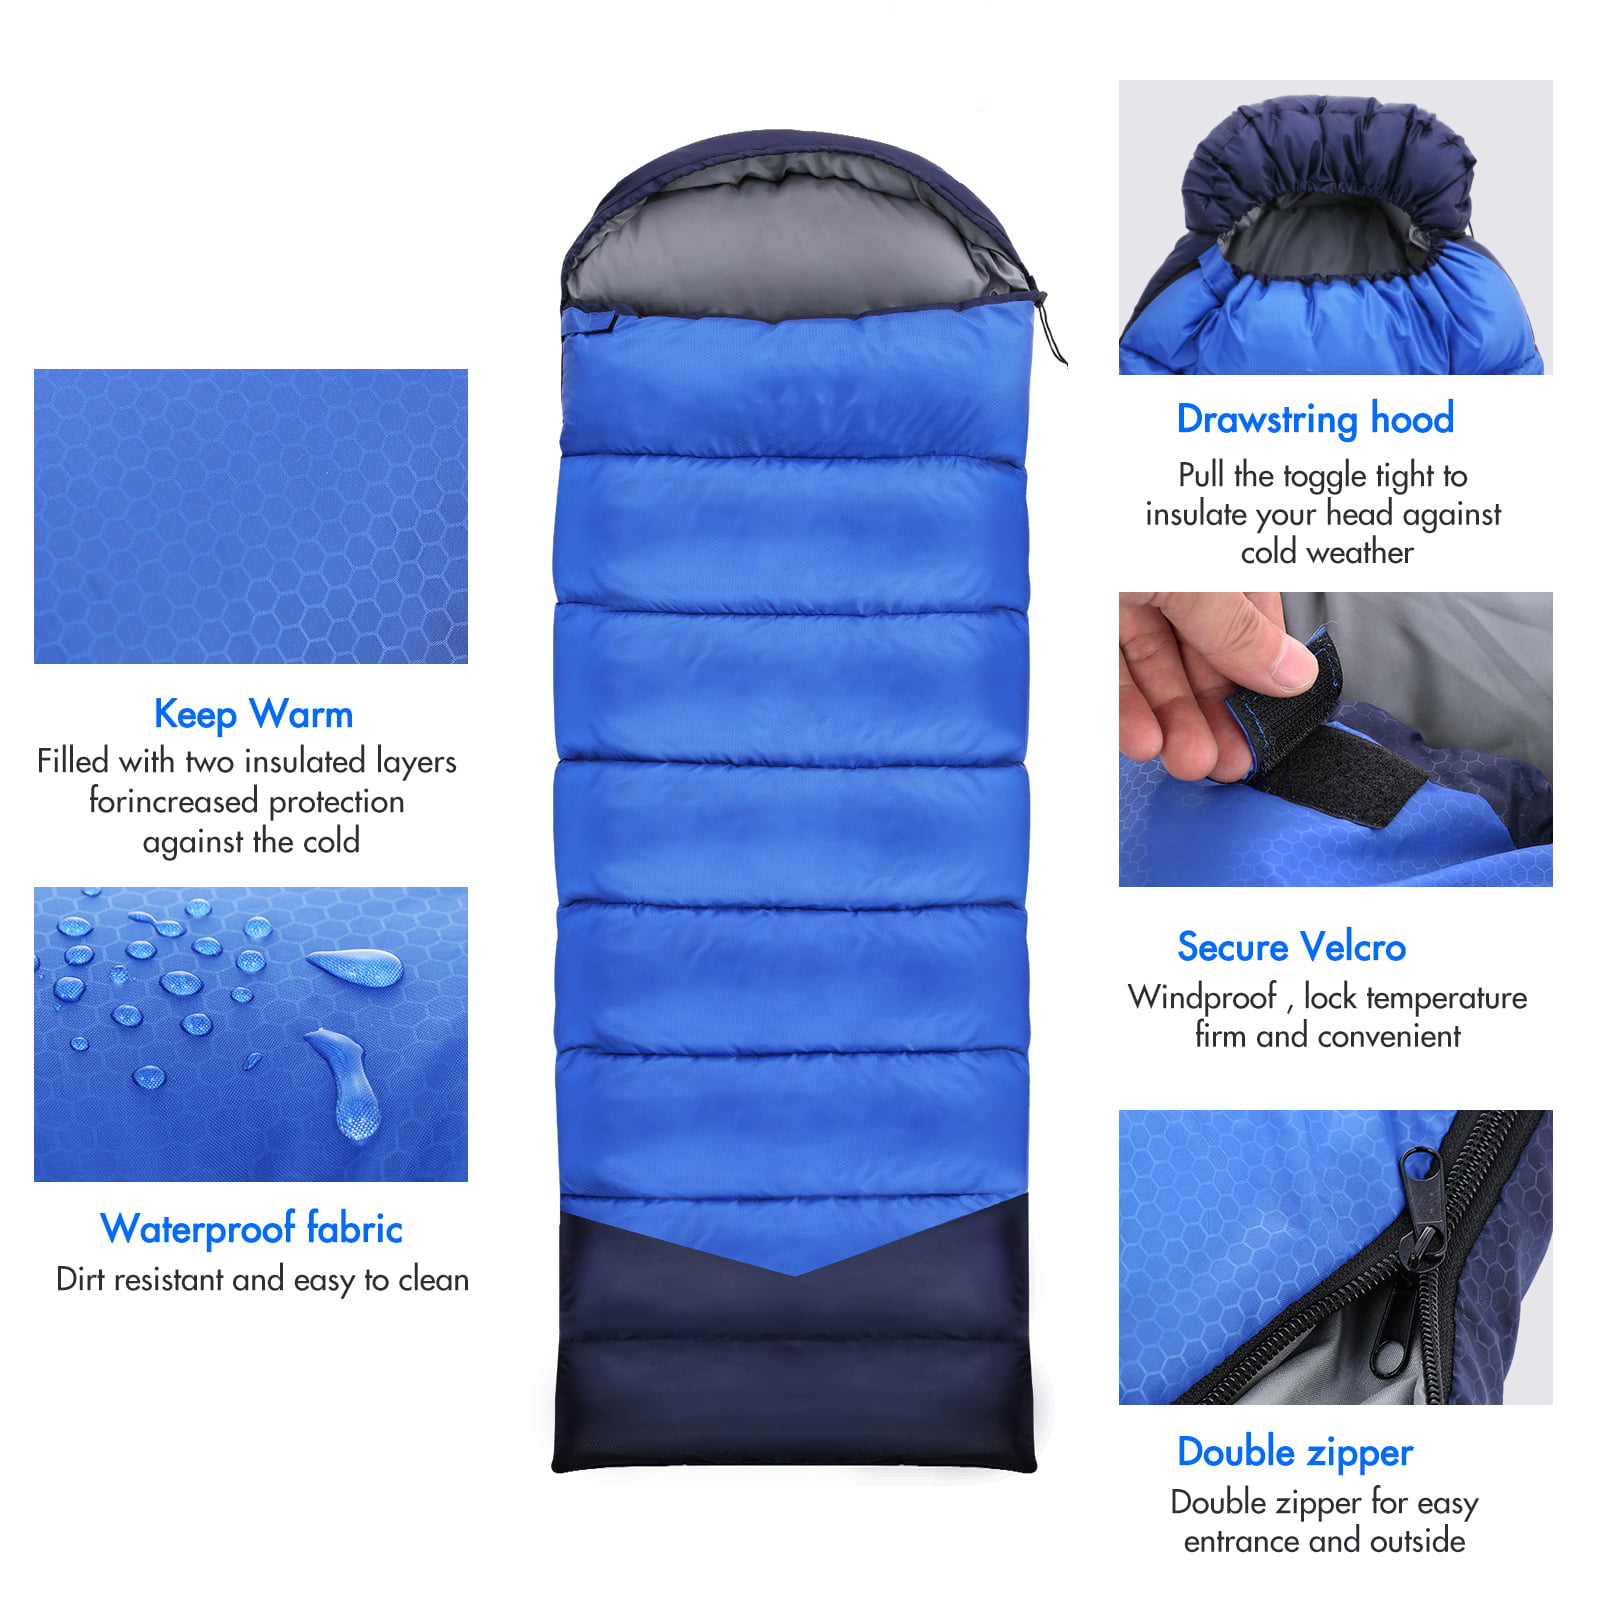 Soulout Envelope Sleeping Bag - 4 Seasons Warm Cold Weather Lightweight, Portable, Waterproof with Compression Sack for Adults & Kids - Indoor &am